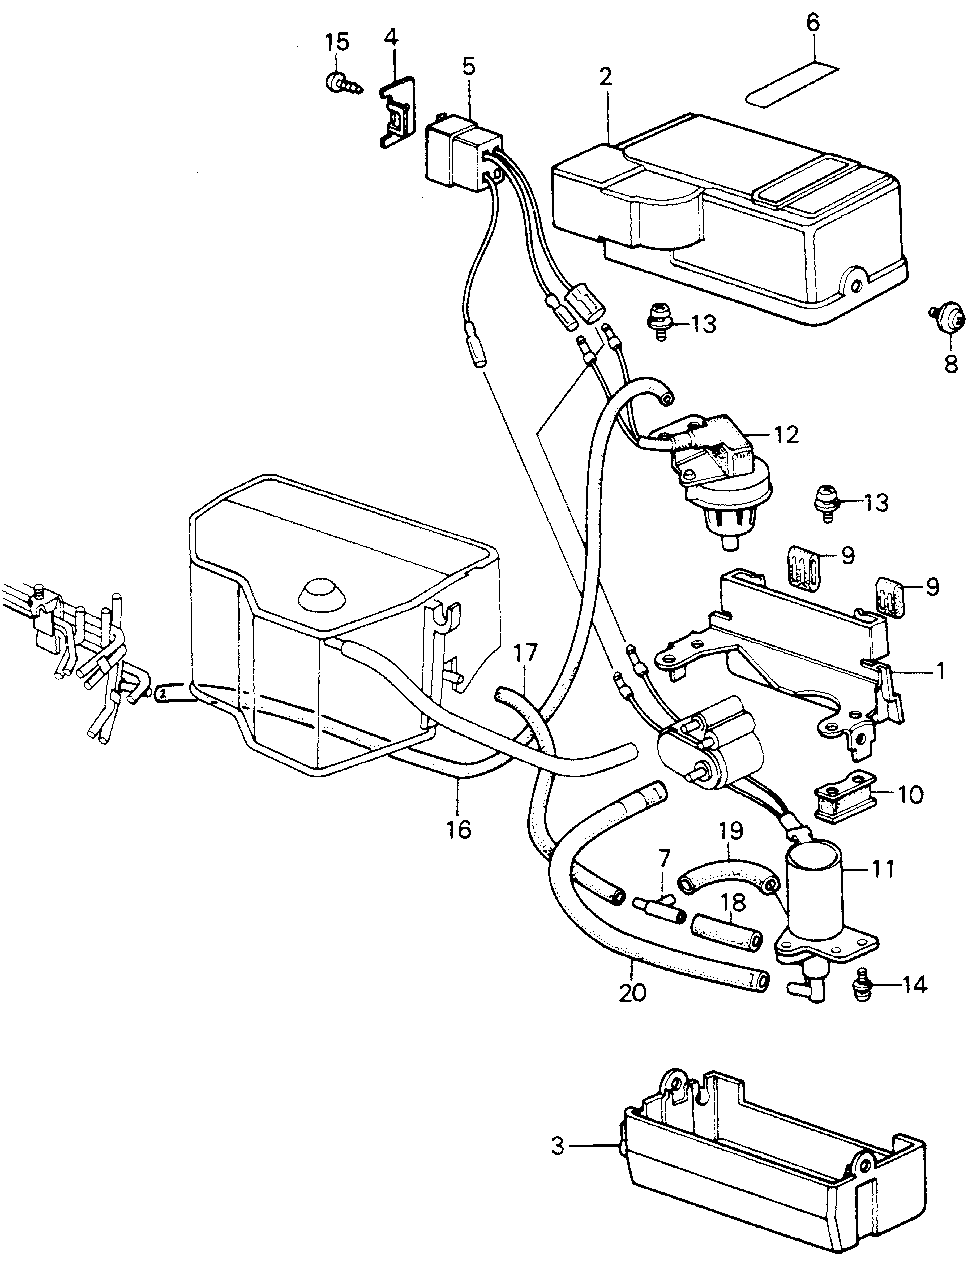 18805-PA6-681 - STAY, CONNECTOR